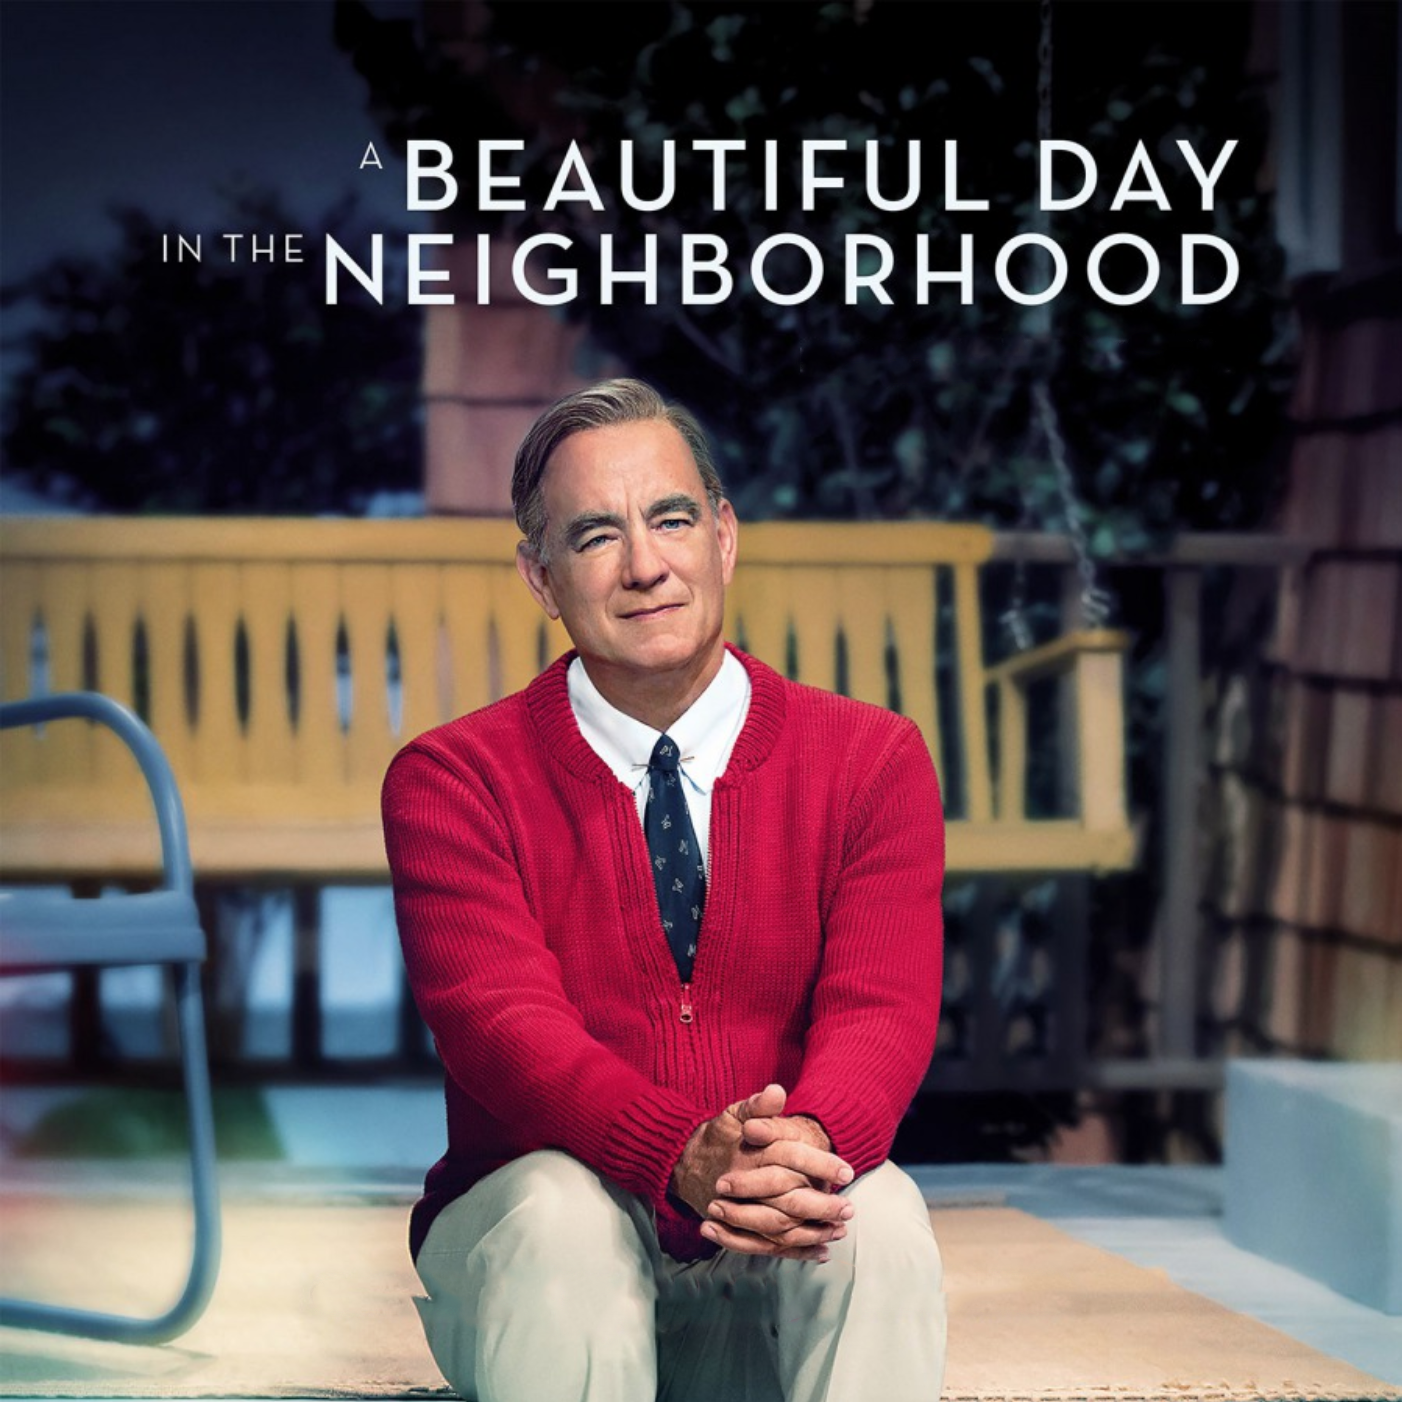 Viewing of “A Beautiful Day in the Neighborhood”